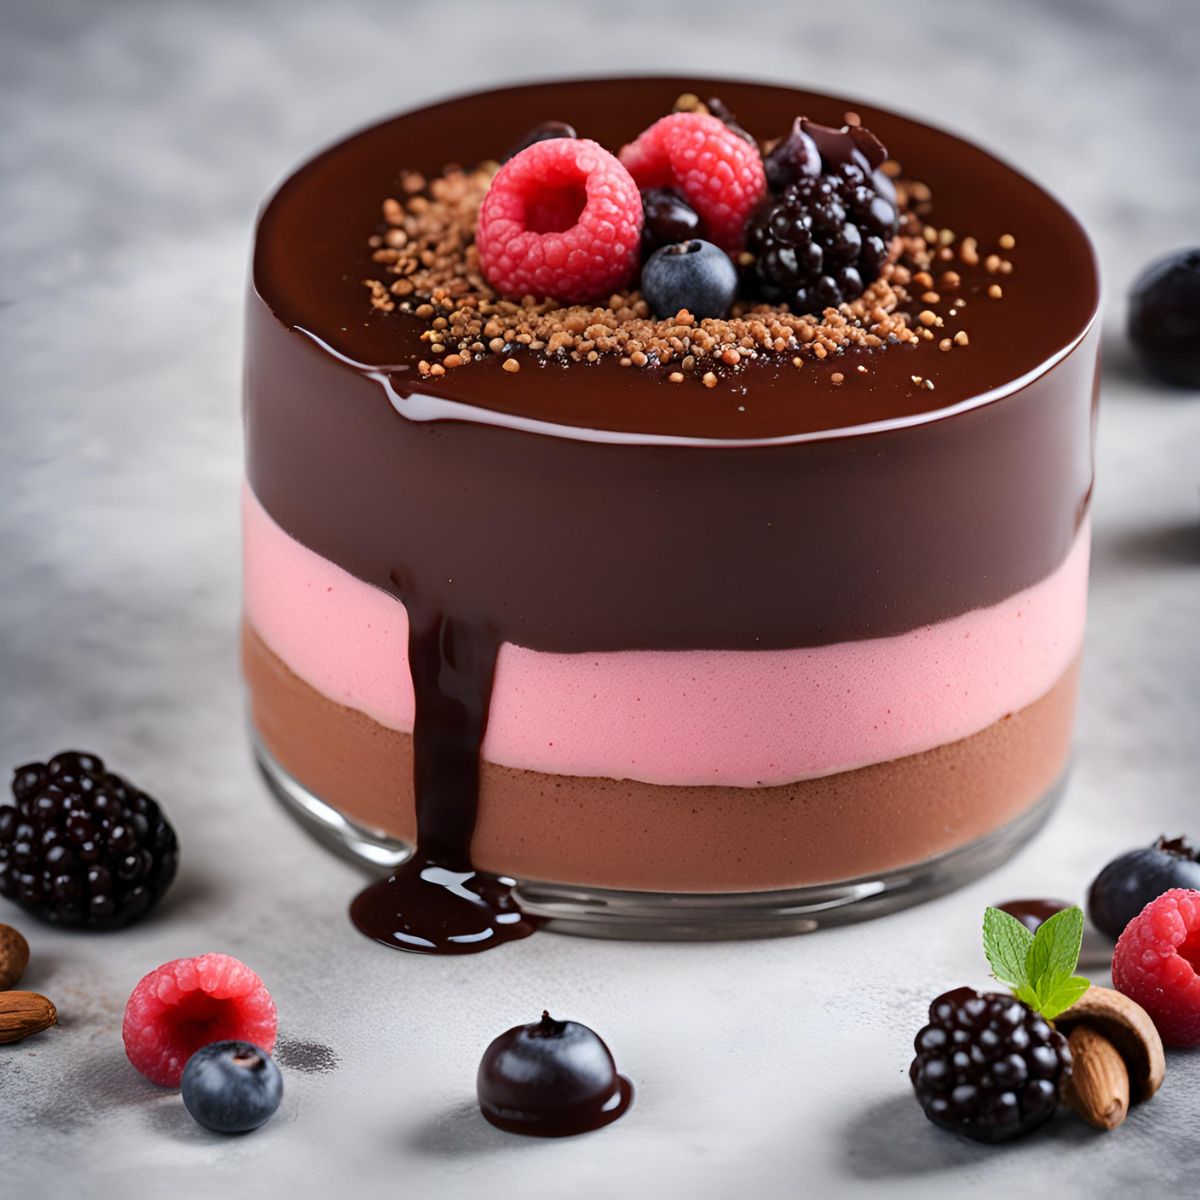 Entremet Recipe: Impress Your Guests with Decadent Layers!